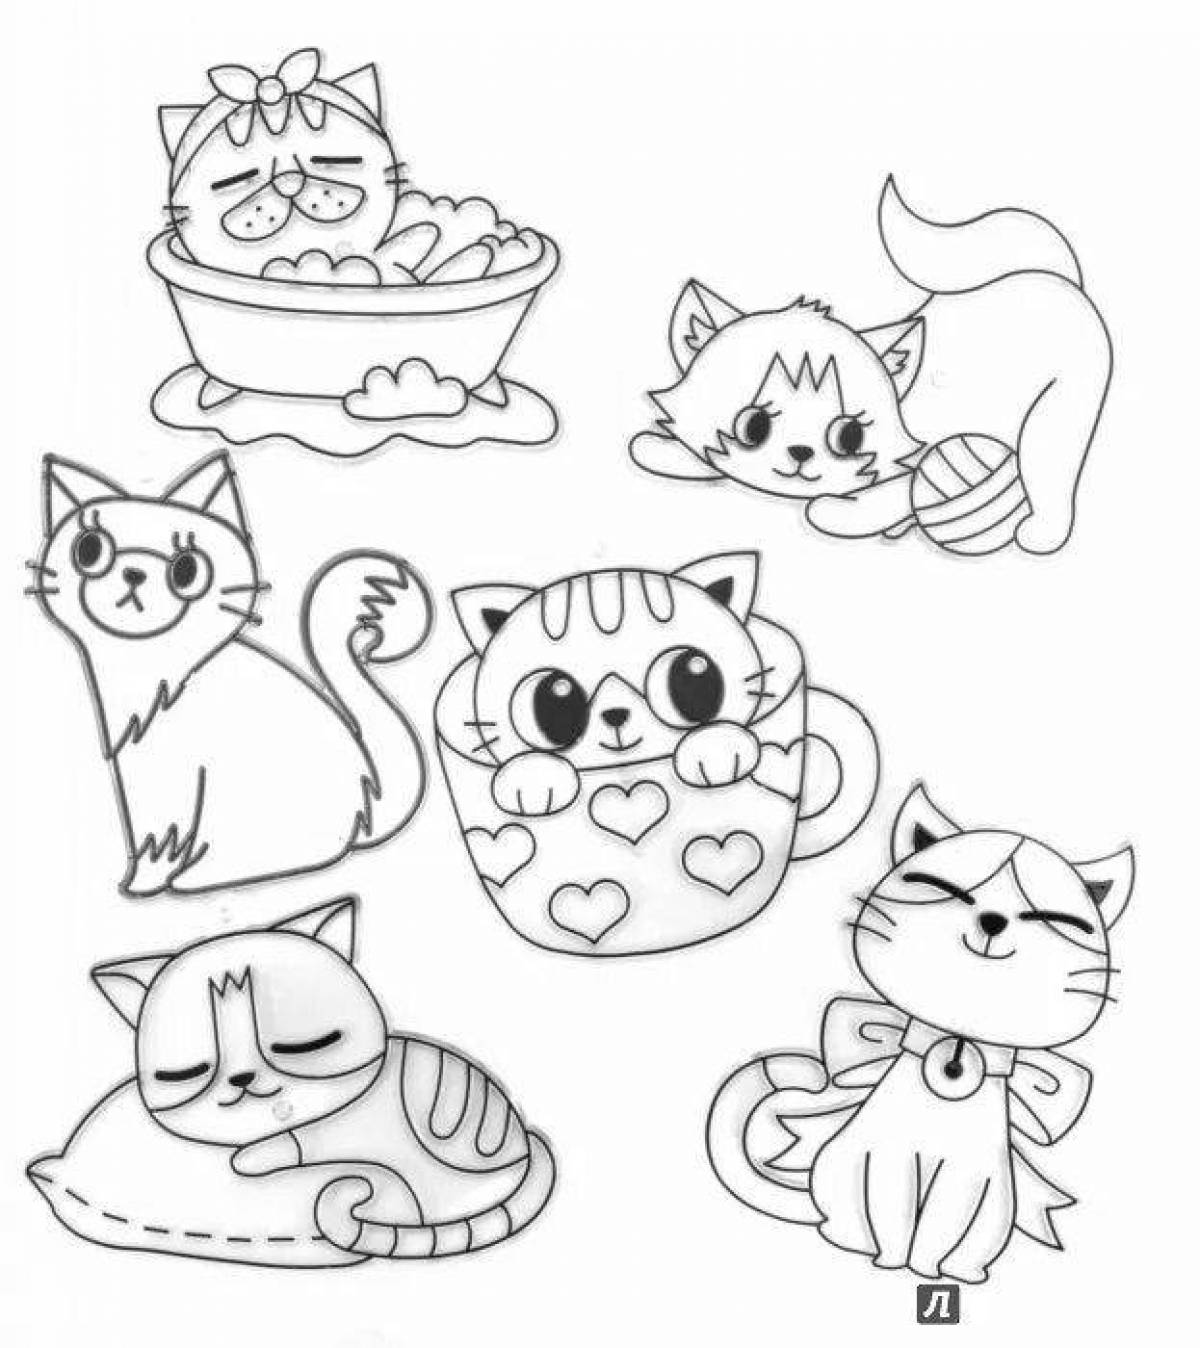 Coloring book fluffy little kittens